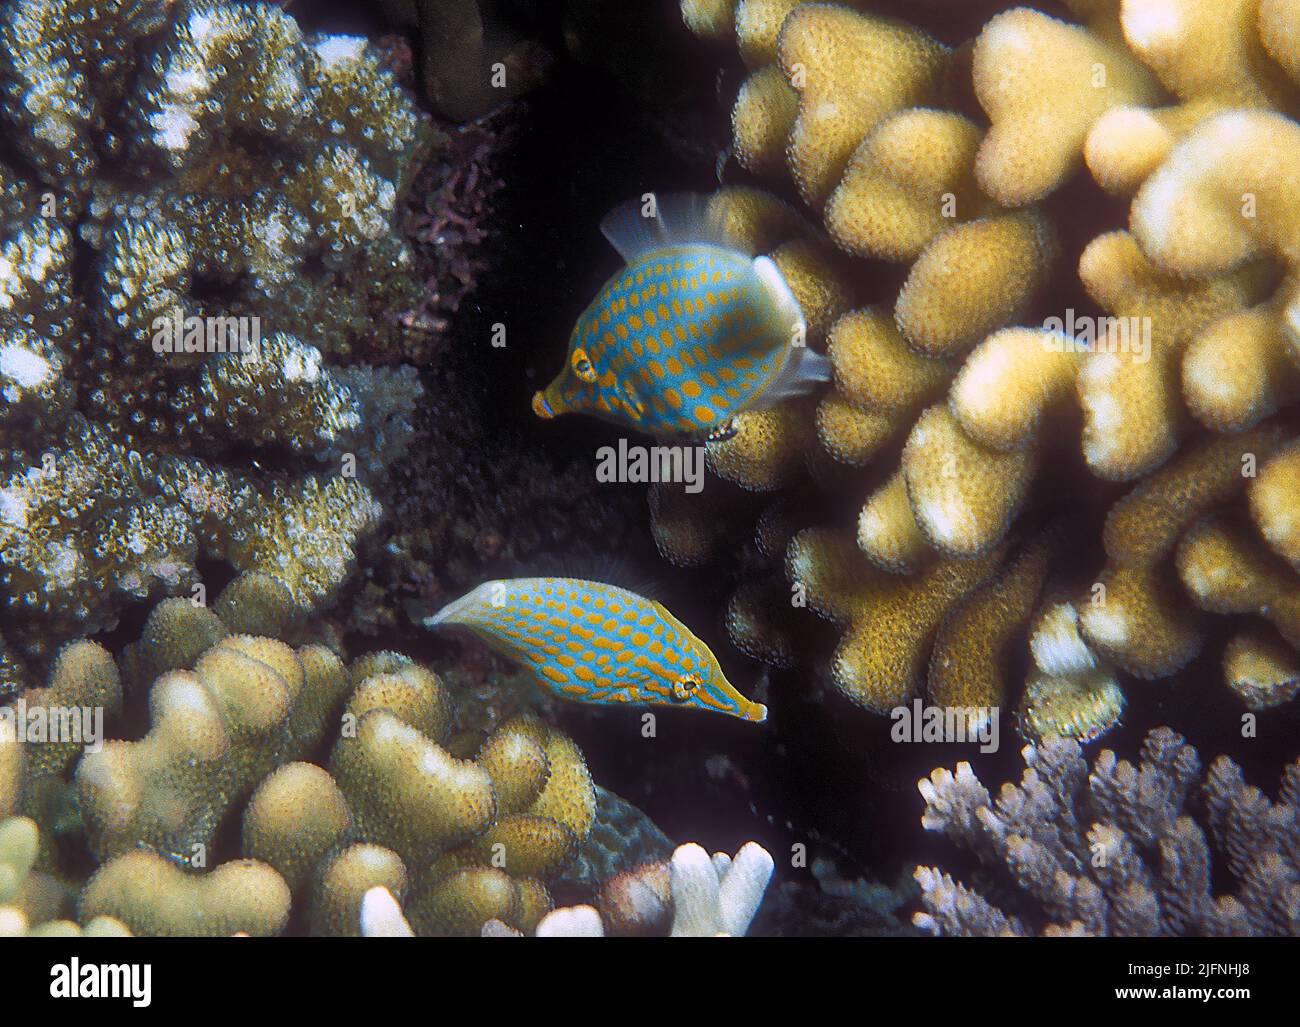 A pair of Orange-spotted Filefish (Oxymonacanthus longirostris) in a shallow reef in the Maldives Stock Photo